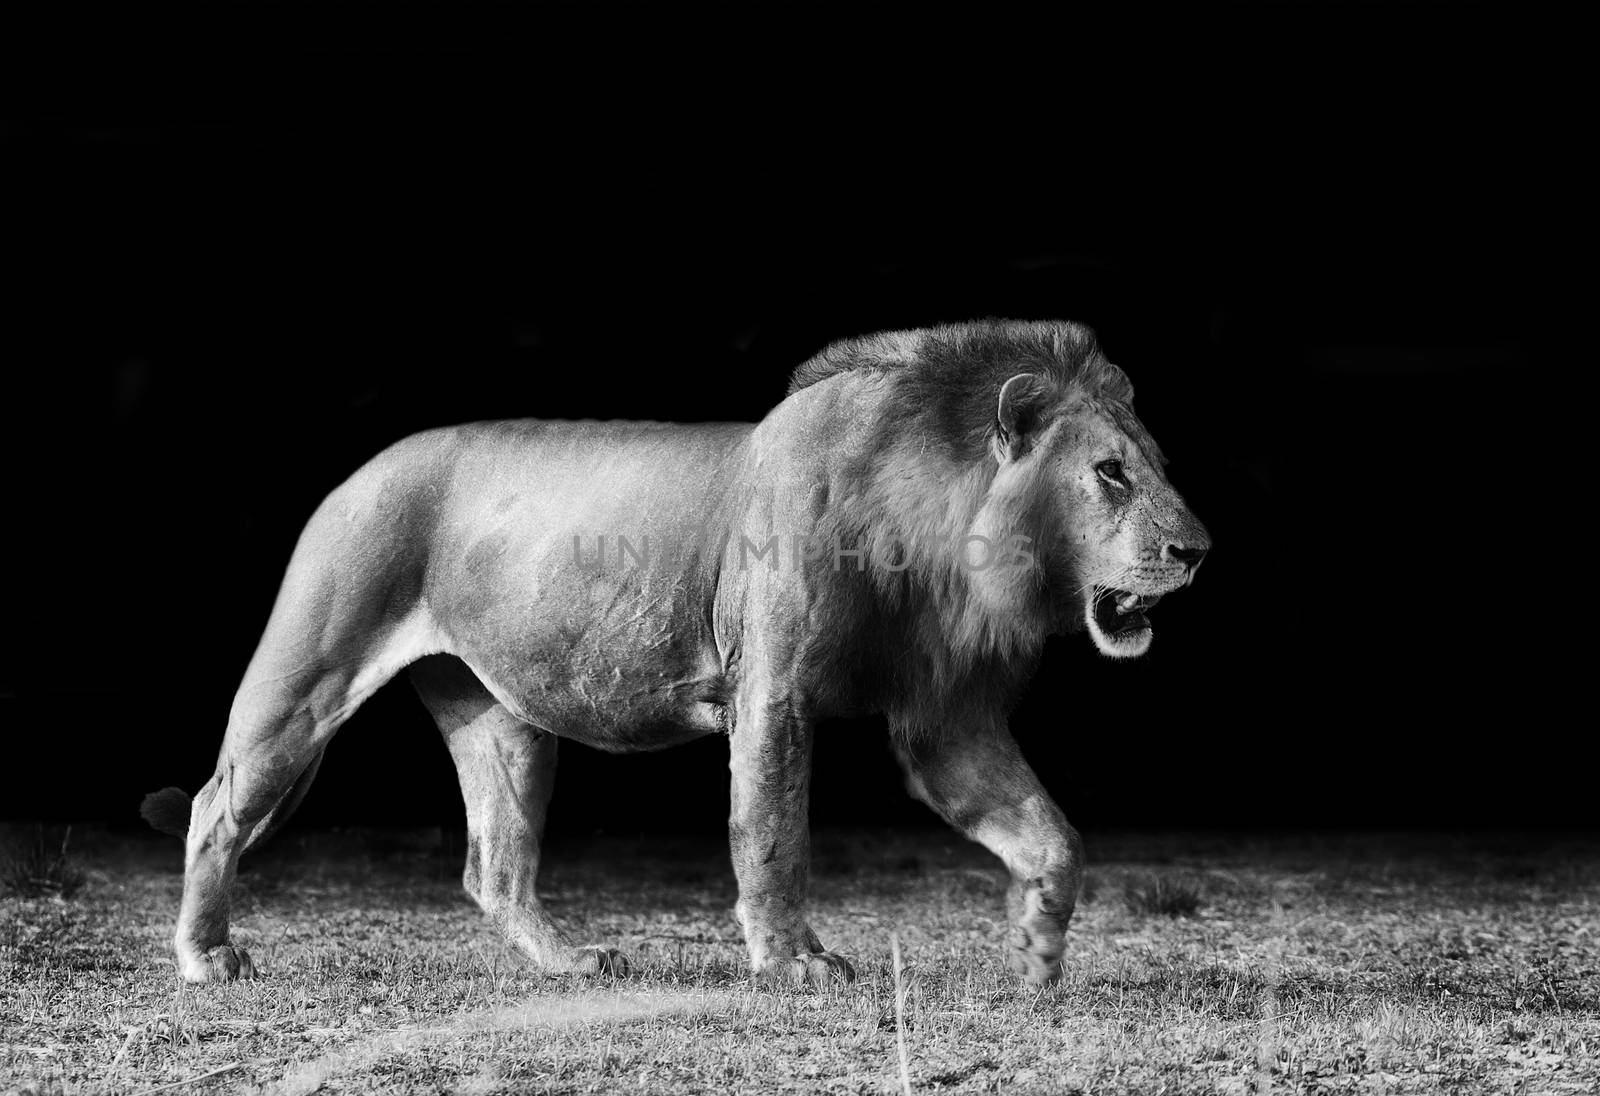 Artistic black and white image of a Lion walking across the open plain